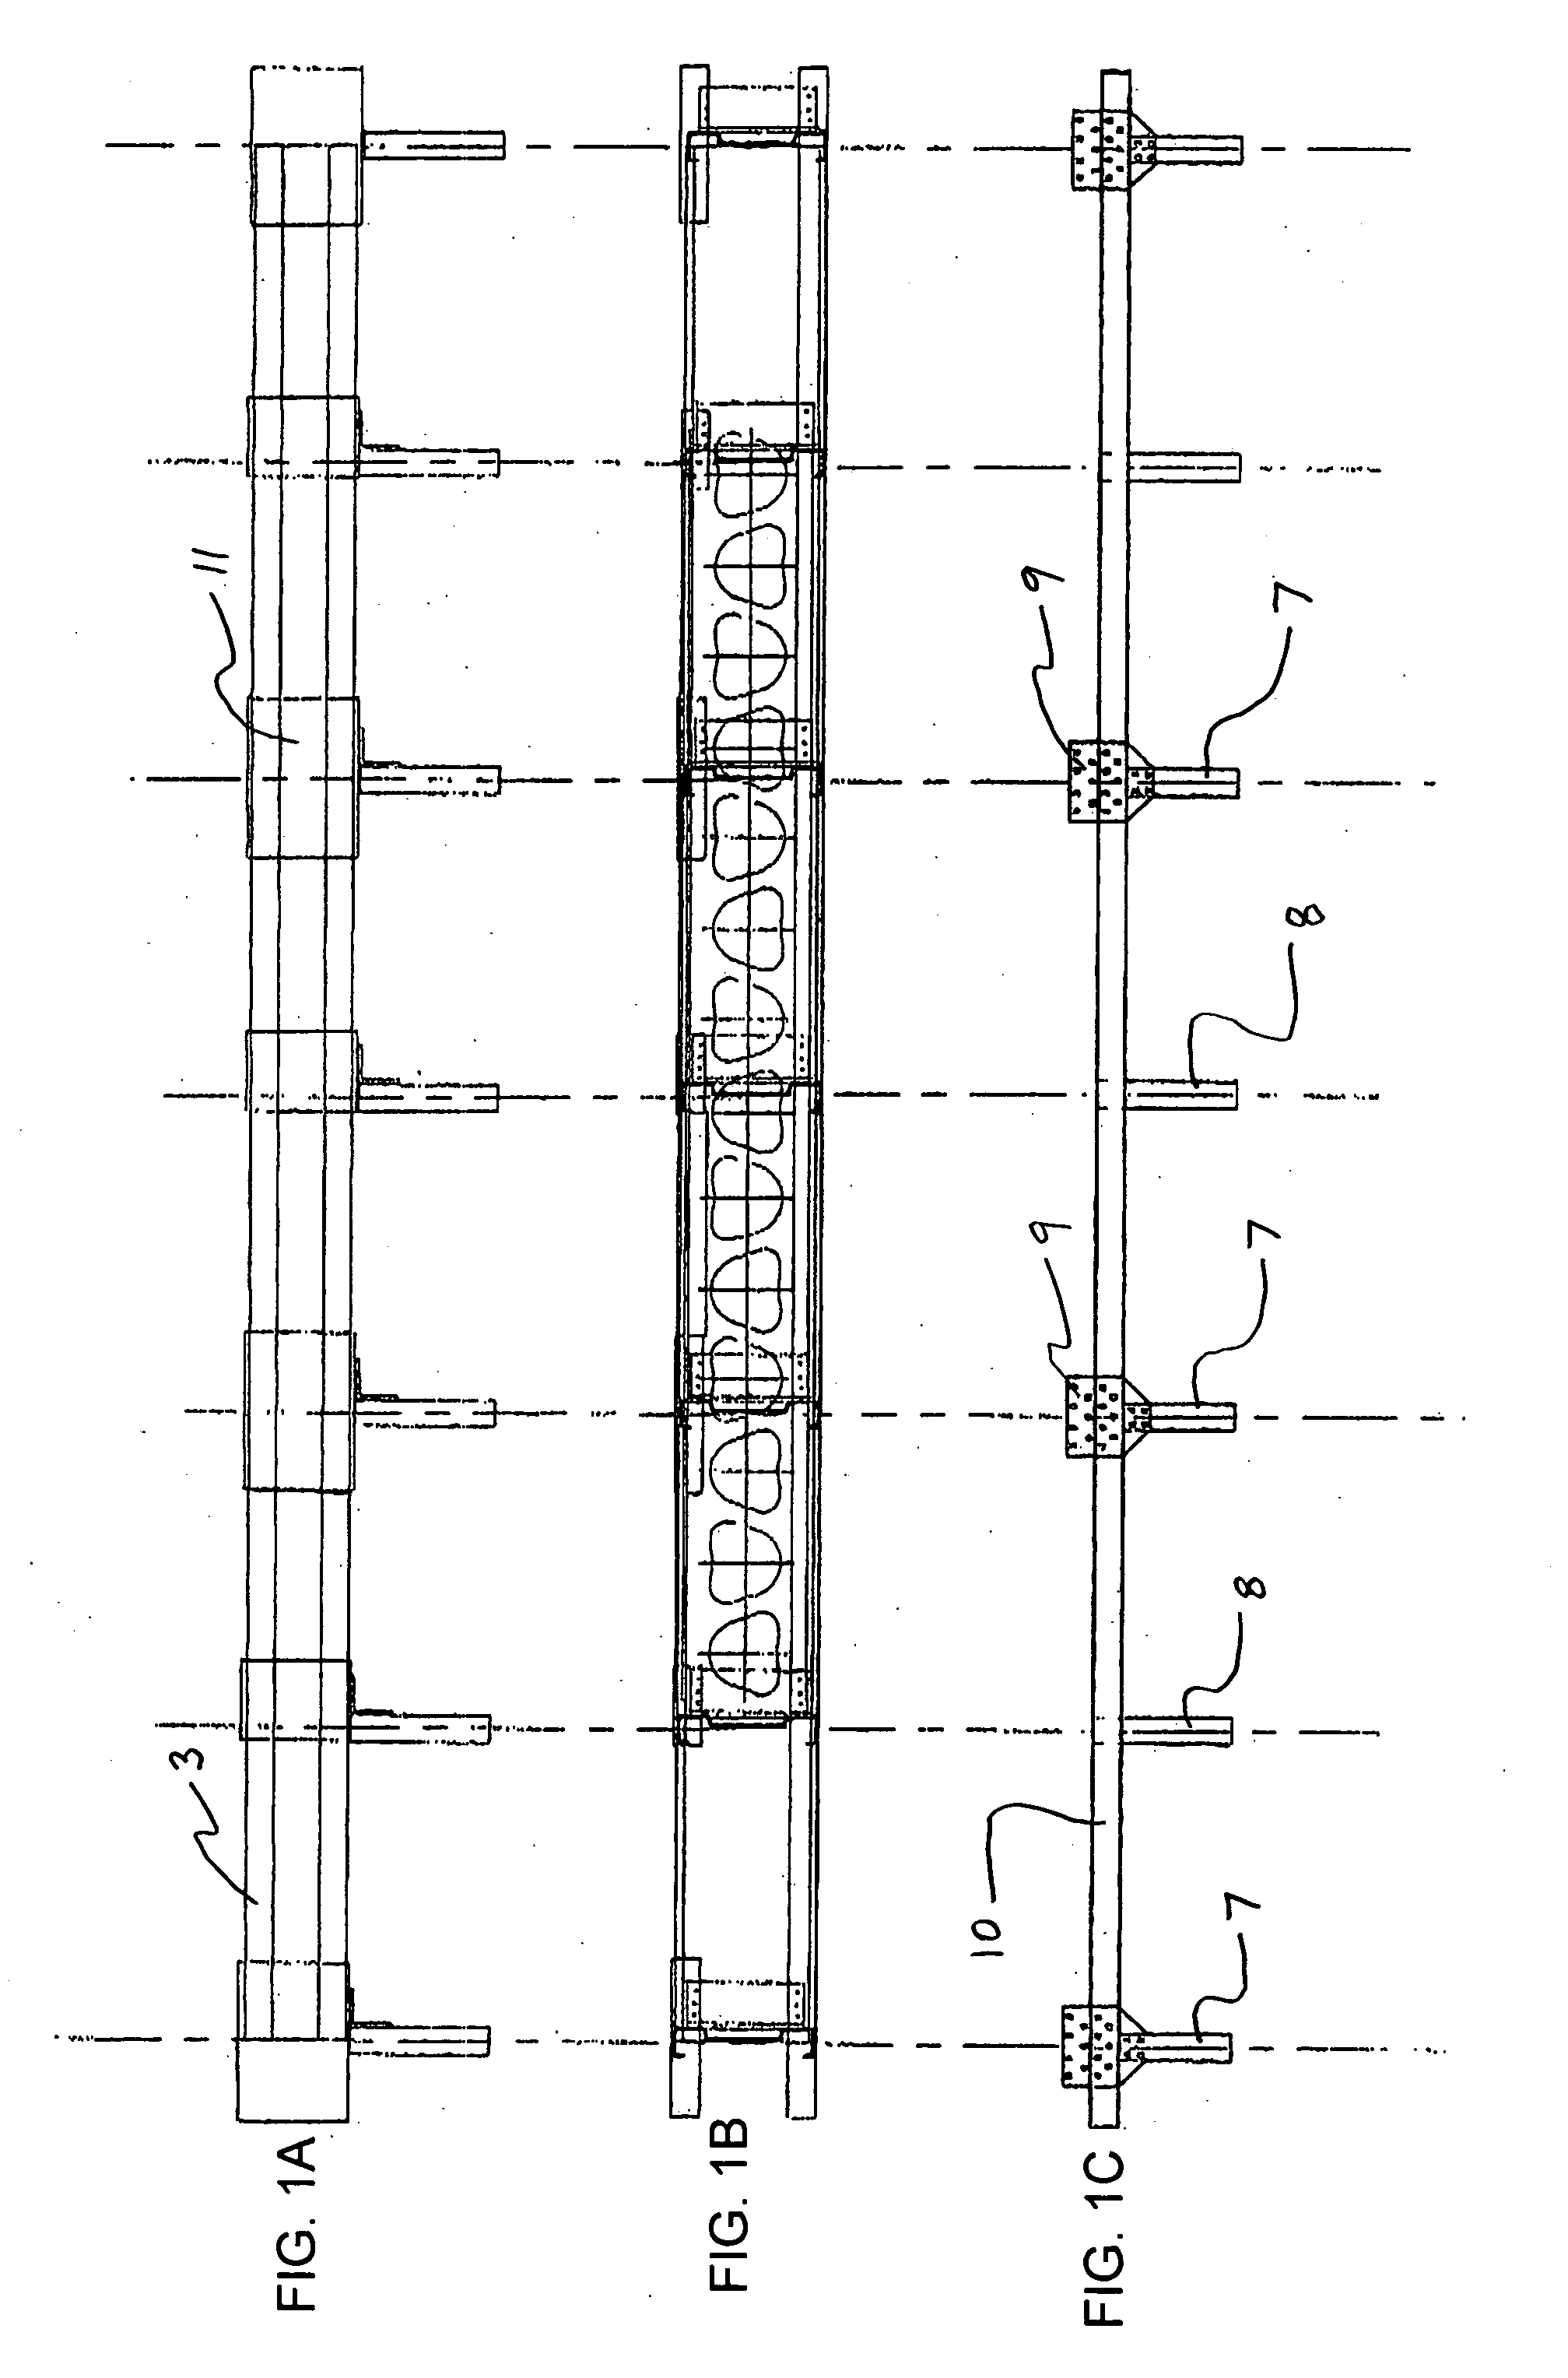 Modular housing system and method of manufacture